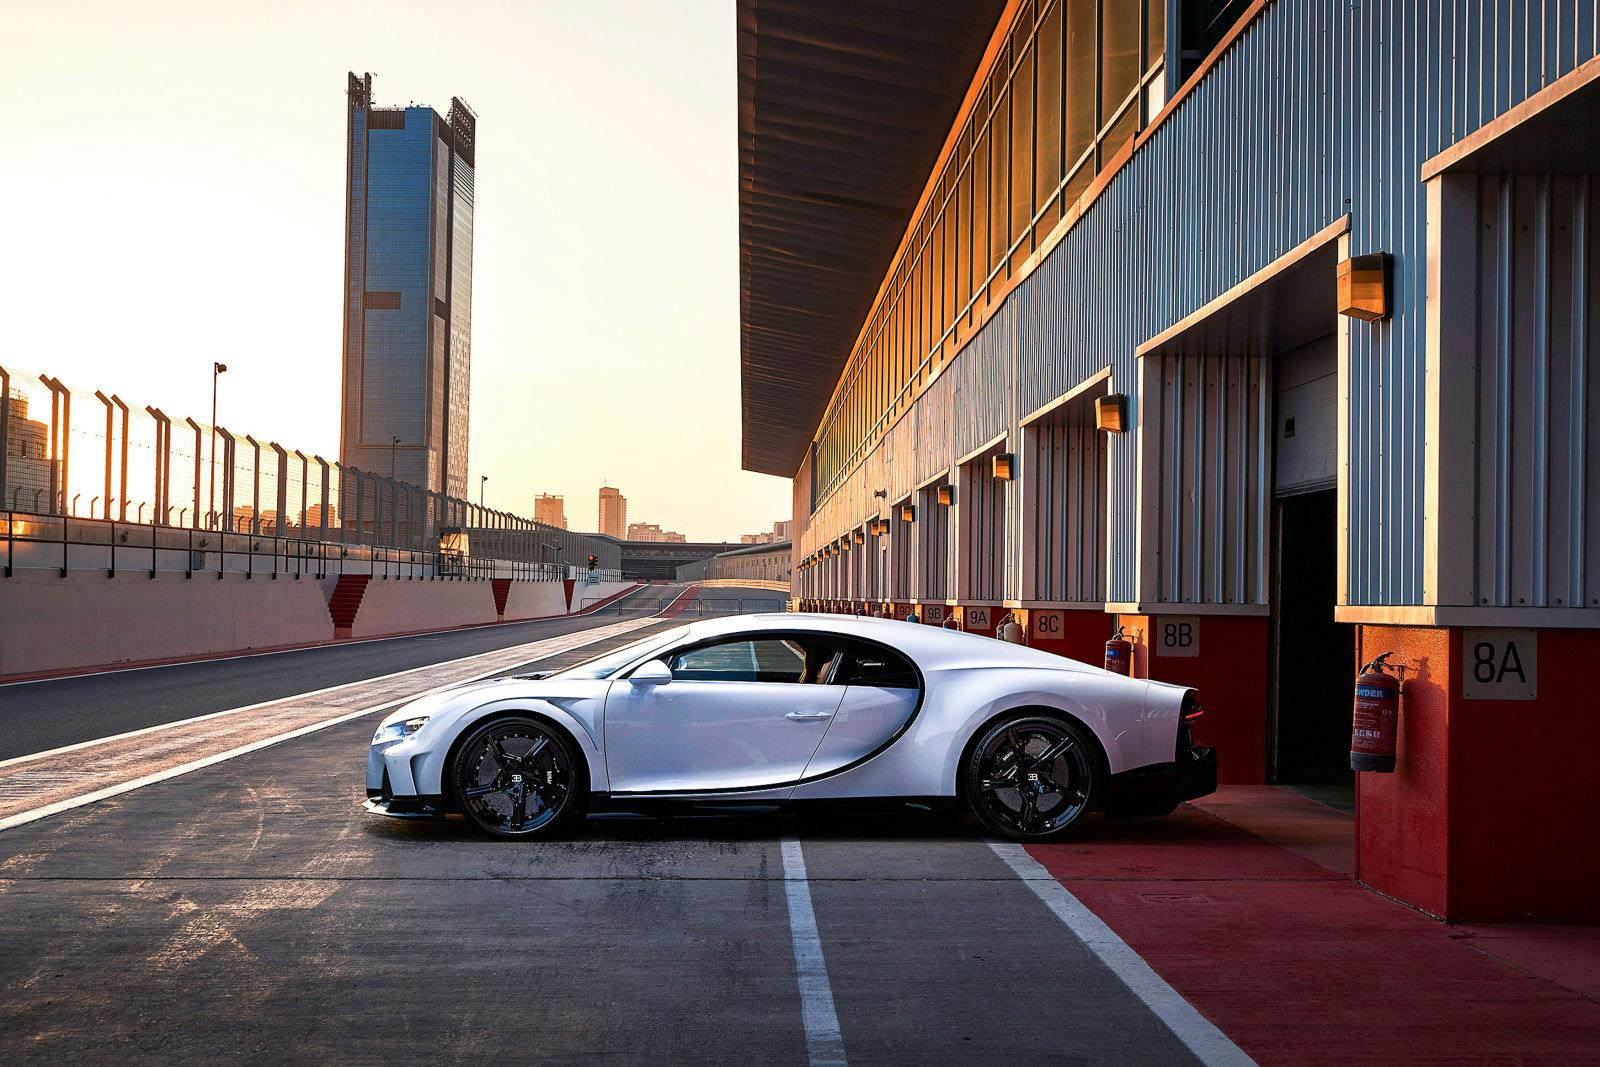 The world’s fastest and most luxurious Grand Tourisme : the Chiron Super Sport at the Autodrome Dubai